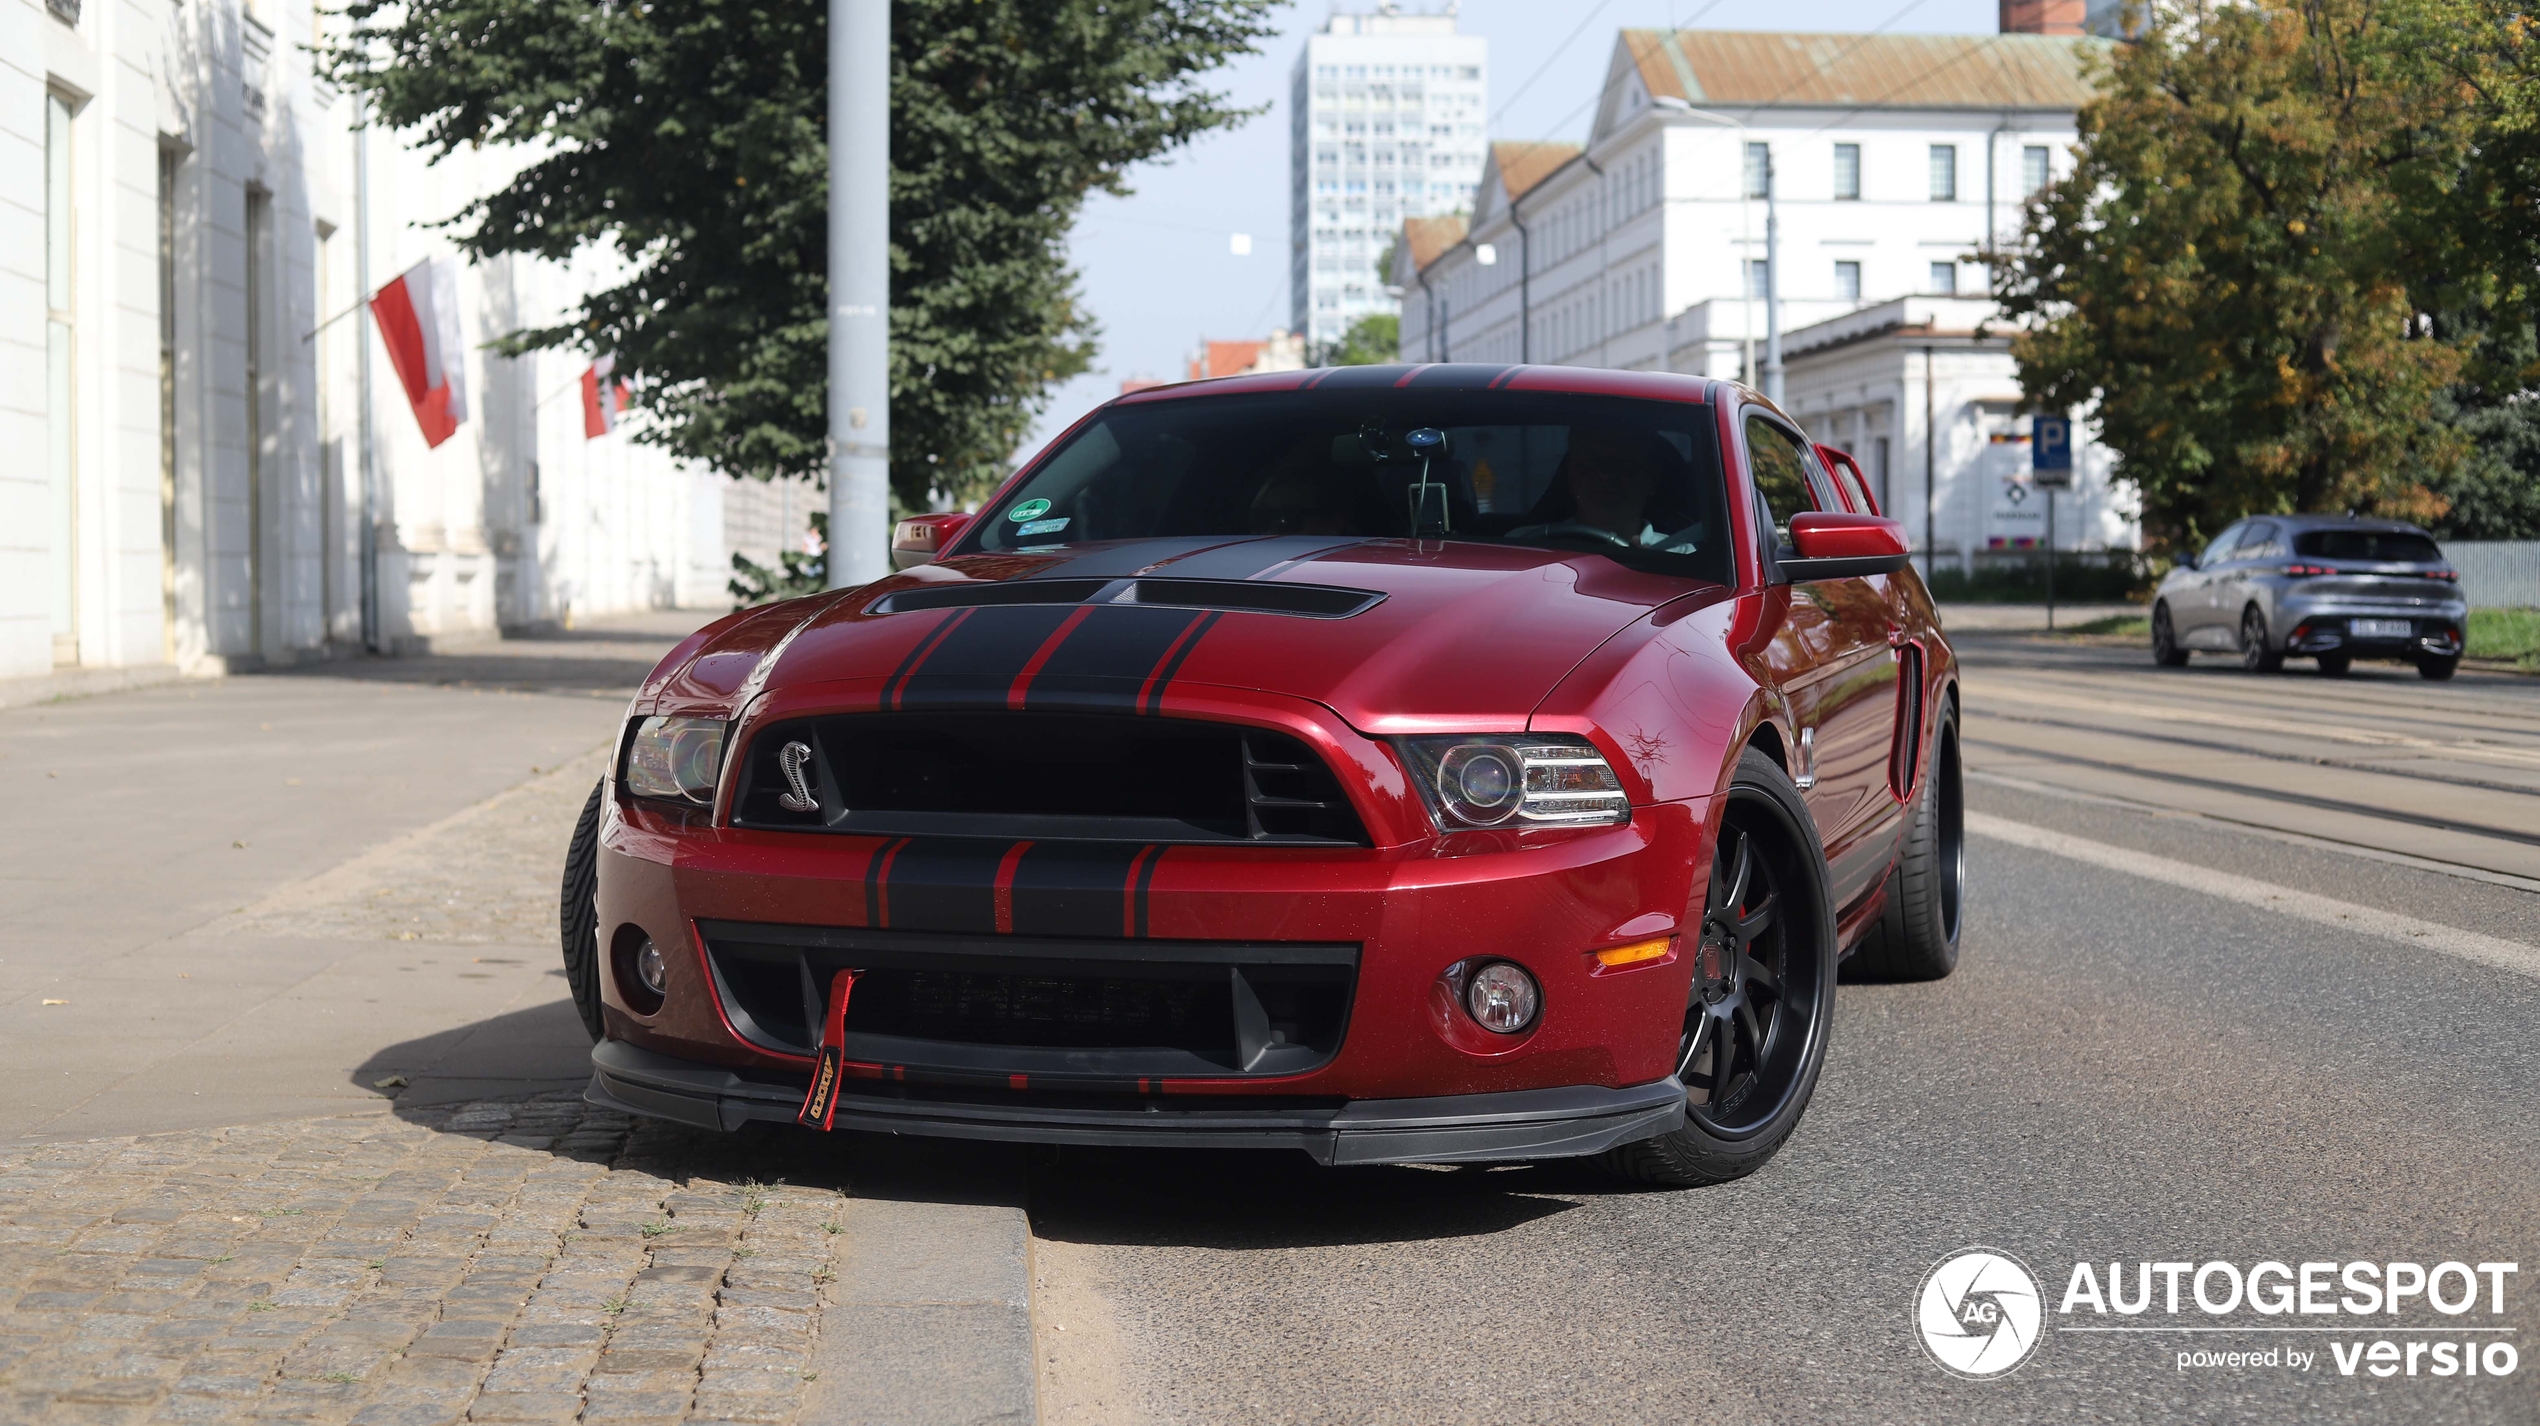 Ford Mustang Shelby GT500 Super Snake 2013